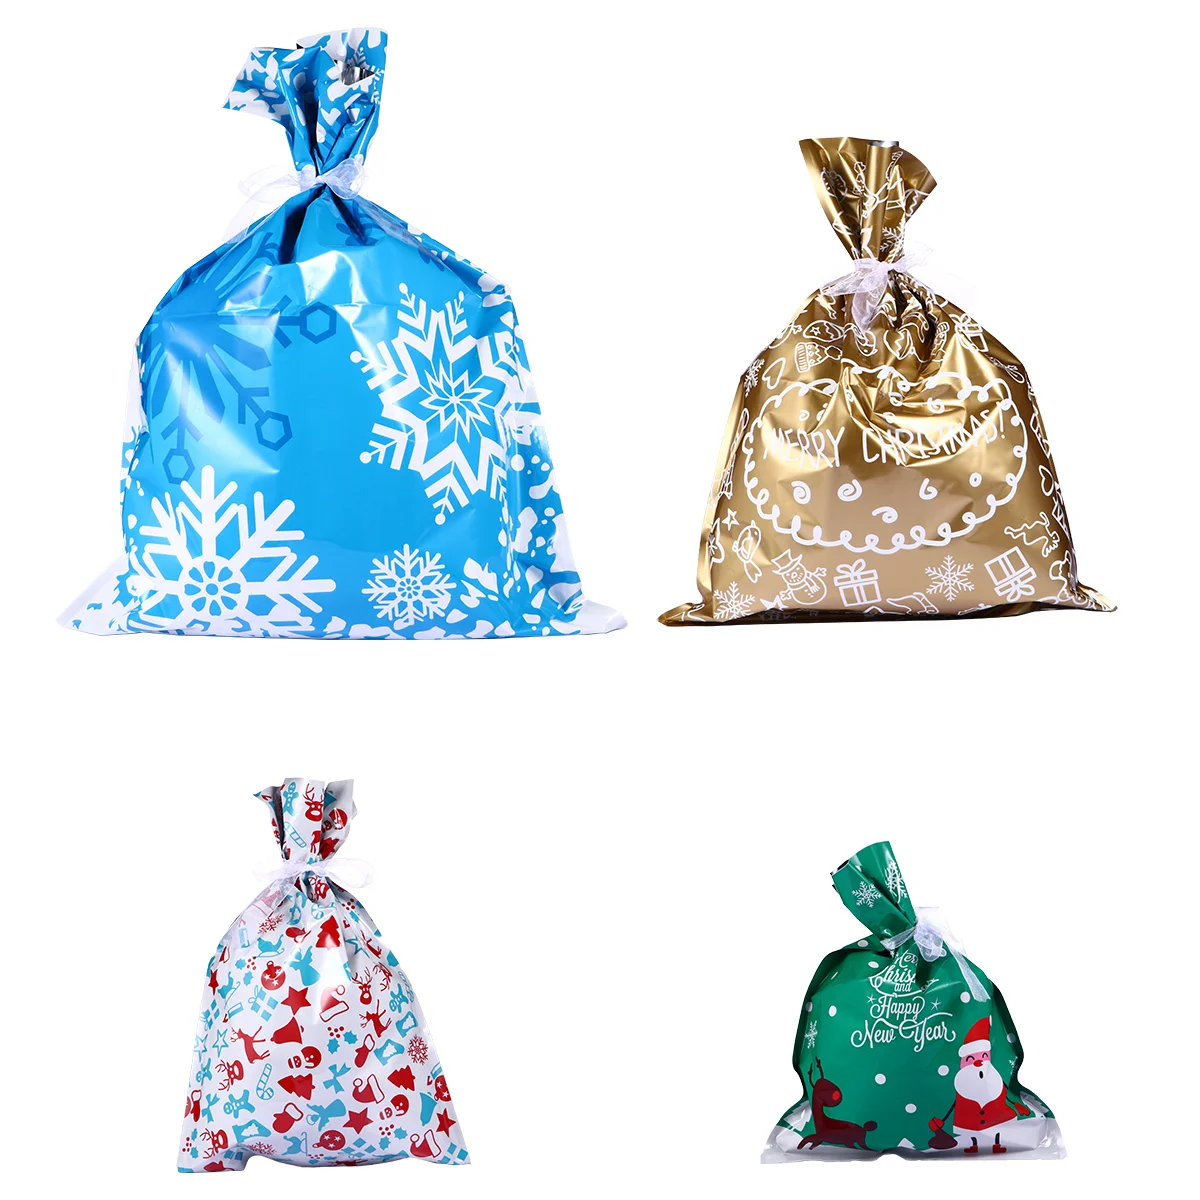 

Christmas Bags Bag Santa Giftdrawstring Goodie Treat Sacks Holiday Wrapping Favor Sack Storage Packing Pouchesaccessory Tote